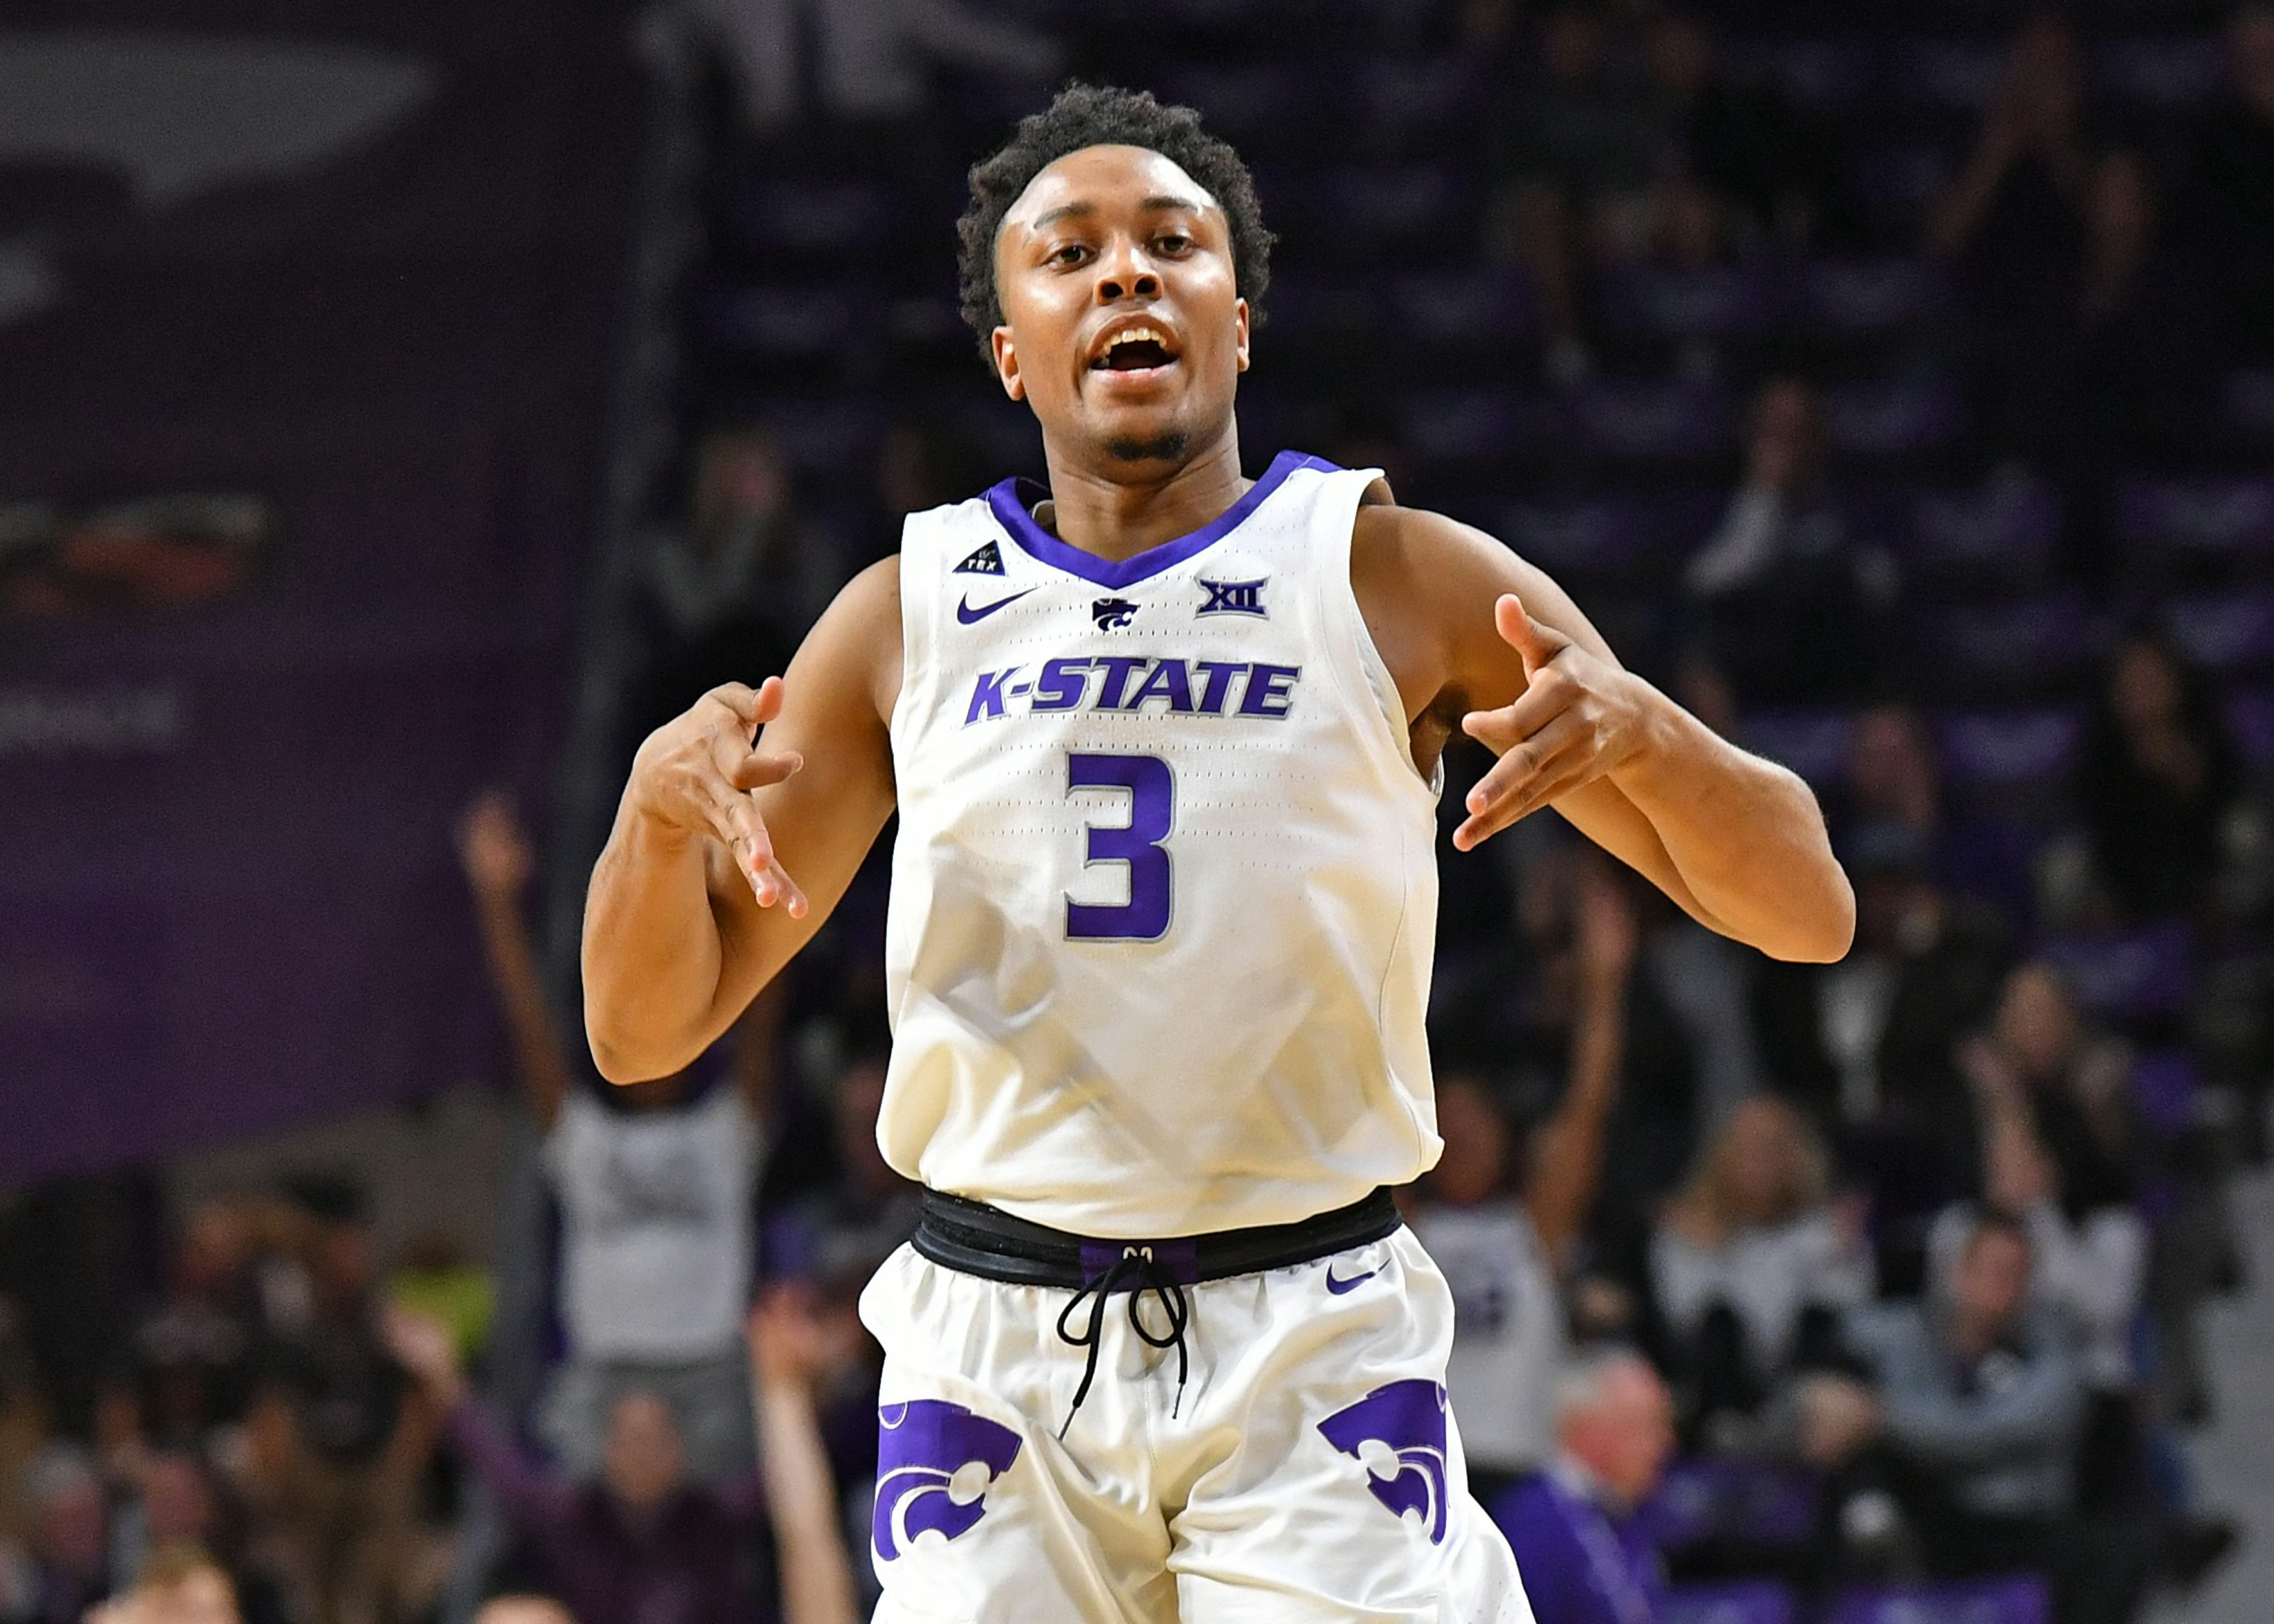 Kansas State Basketball Keys to move past UC Irvine in the first round